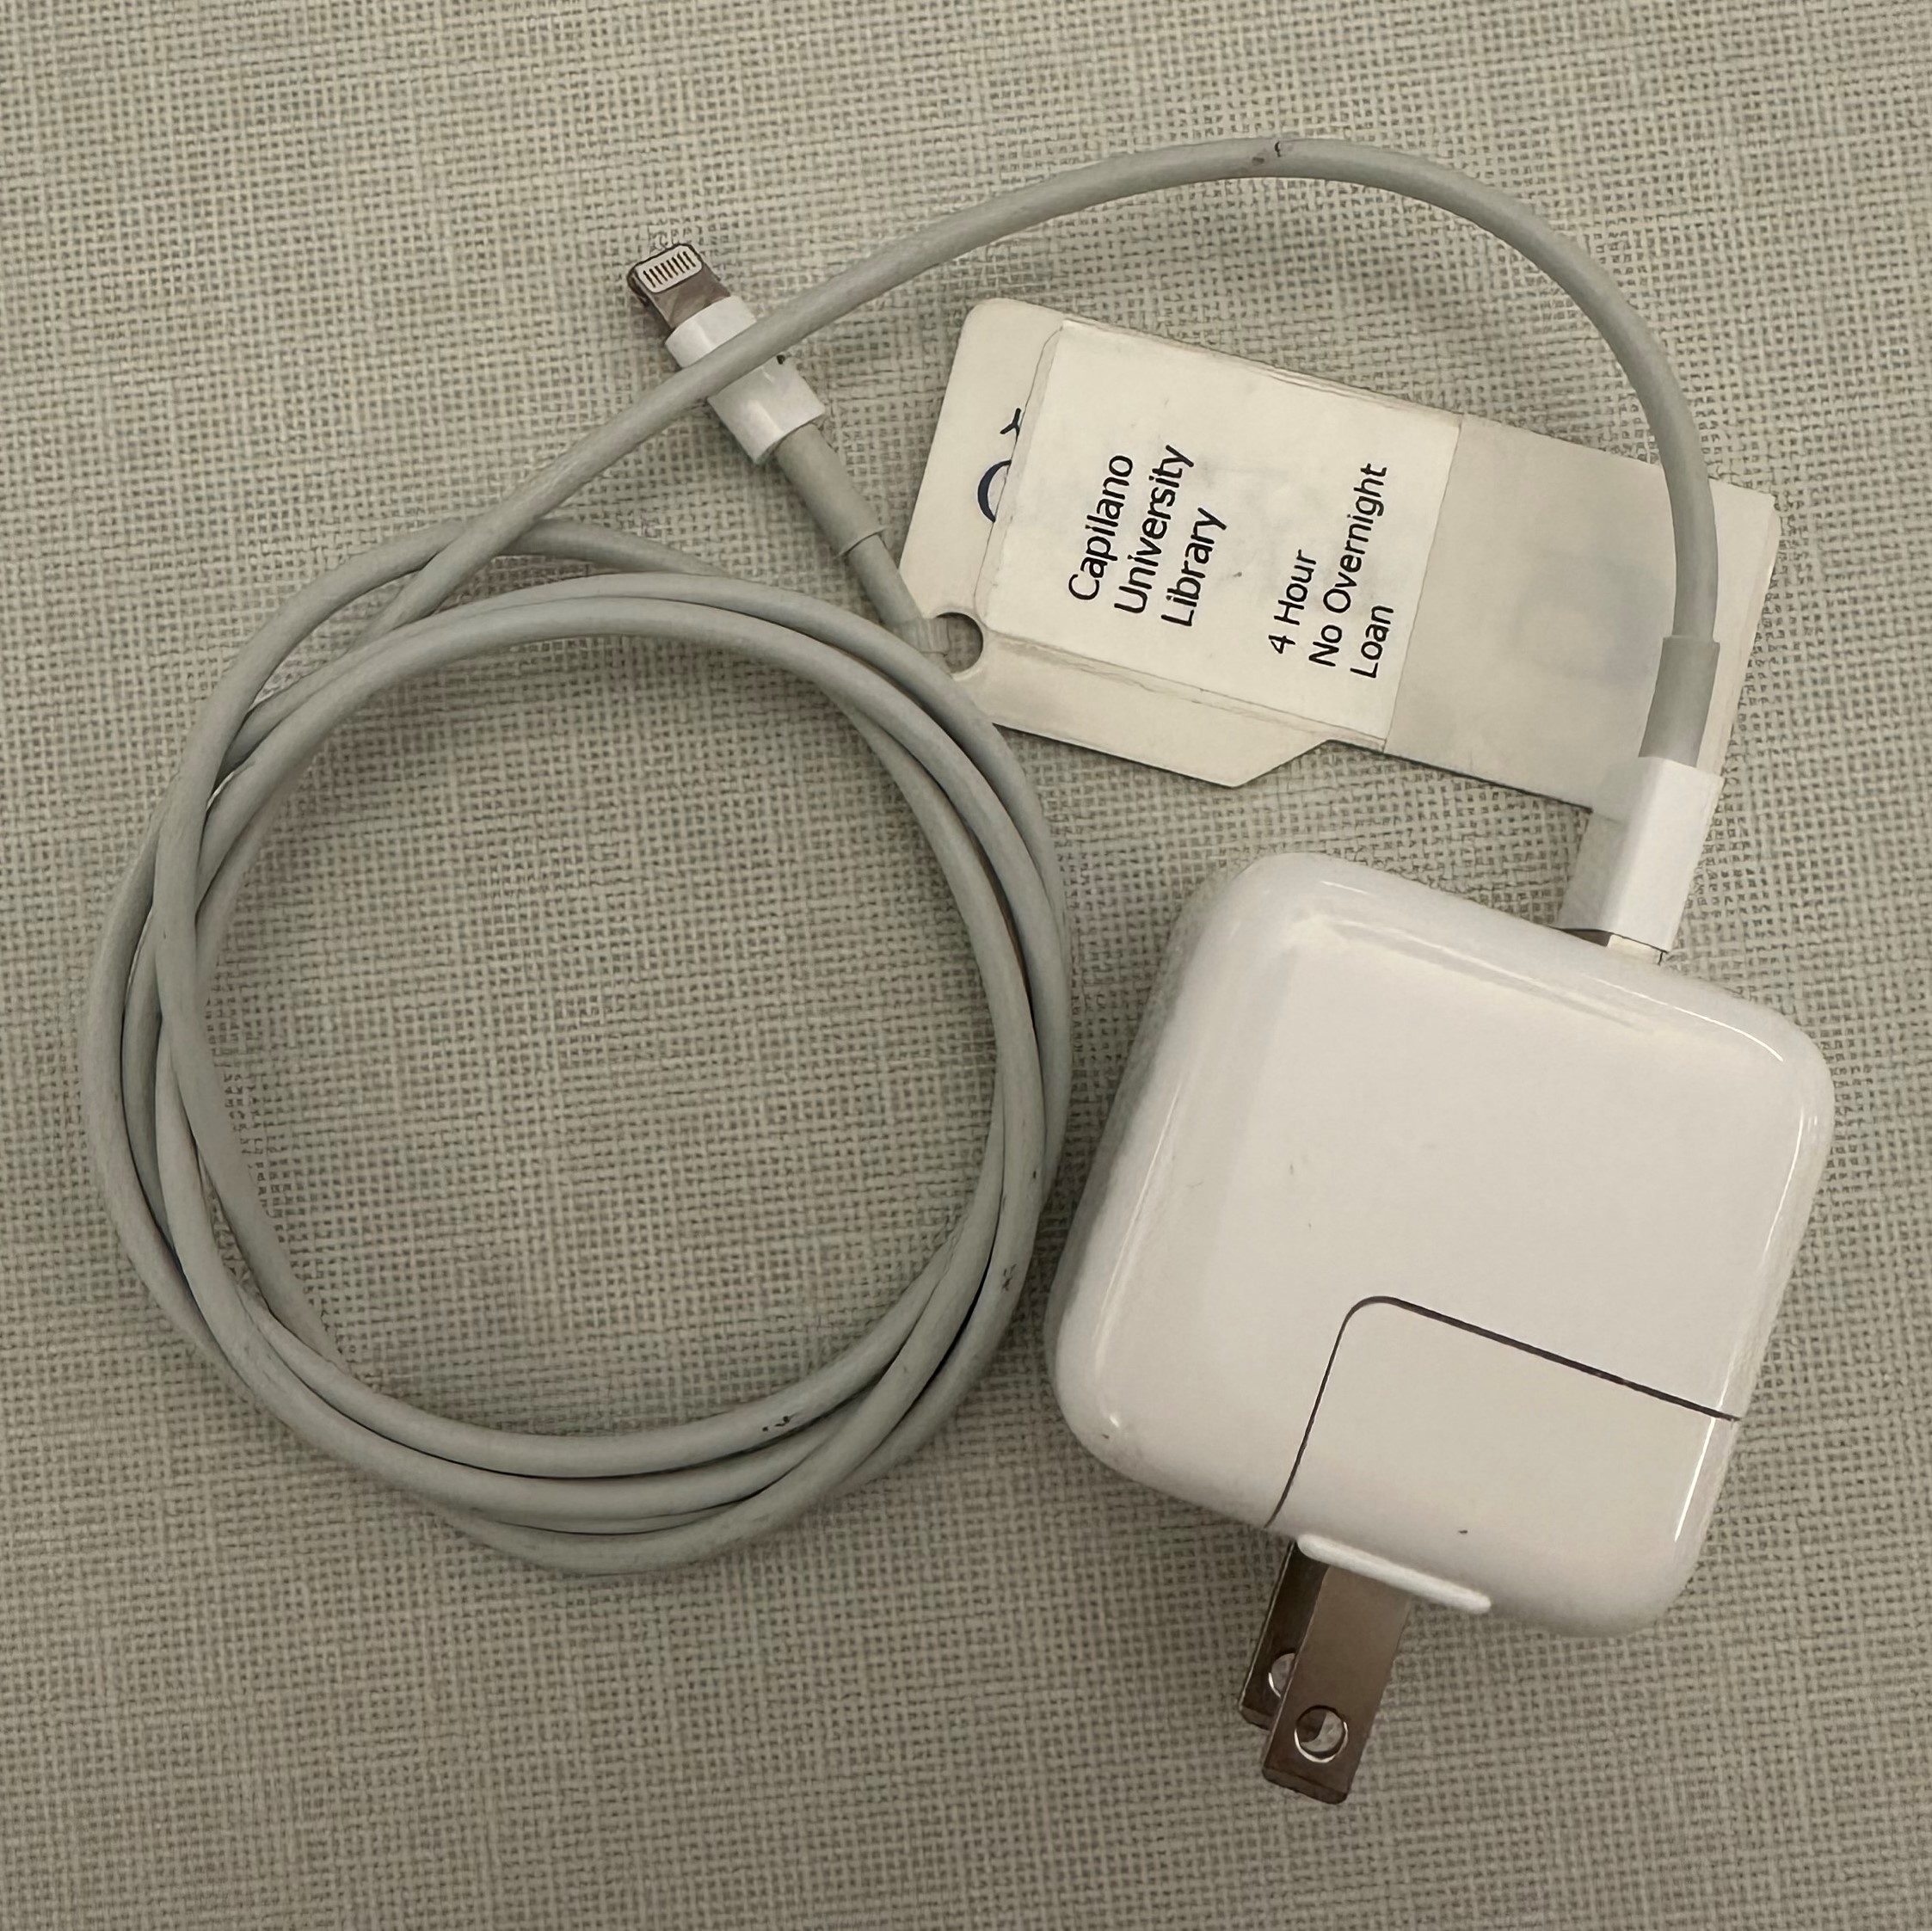 Apple iPhone charger